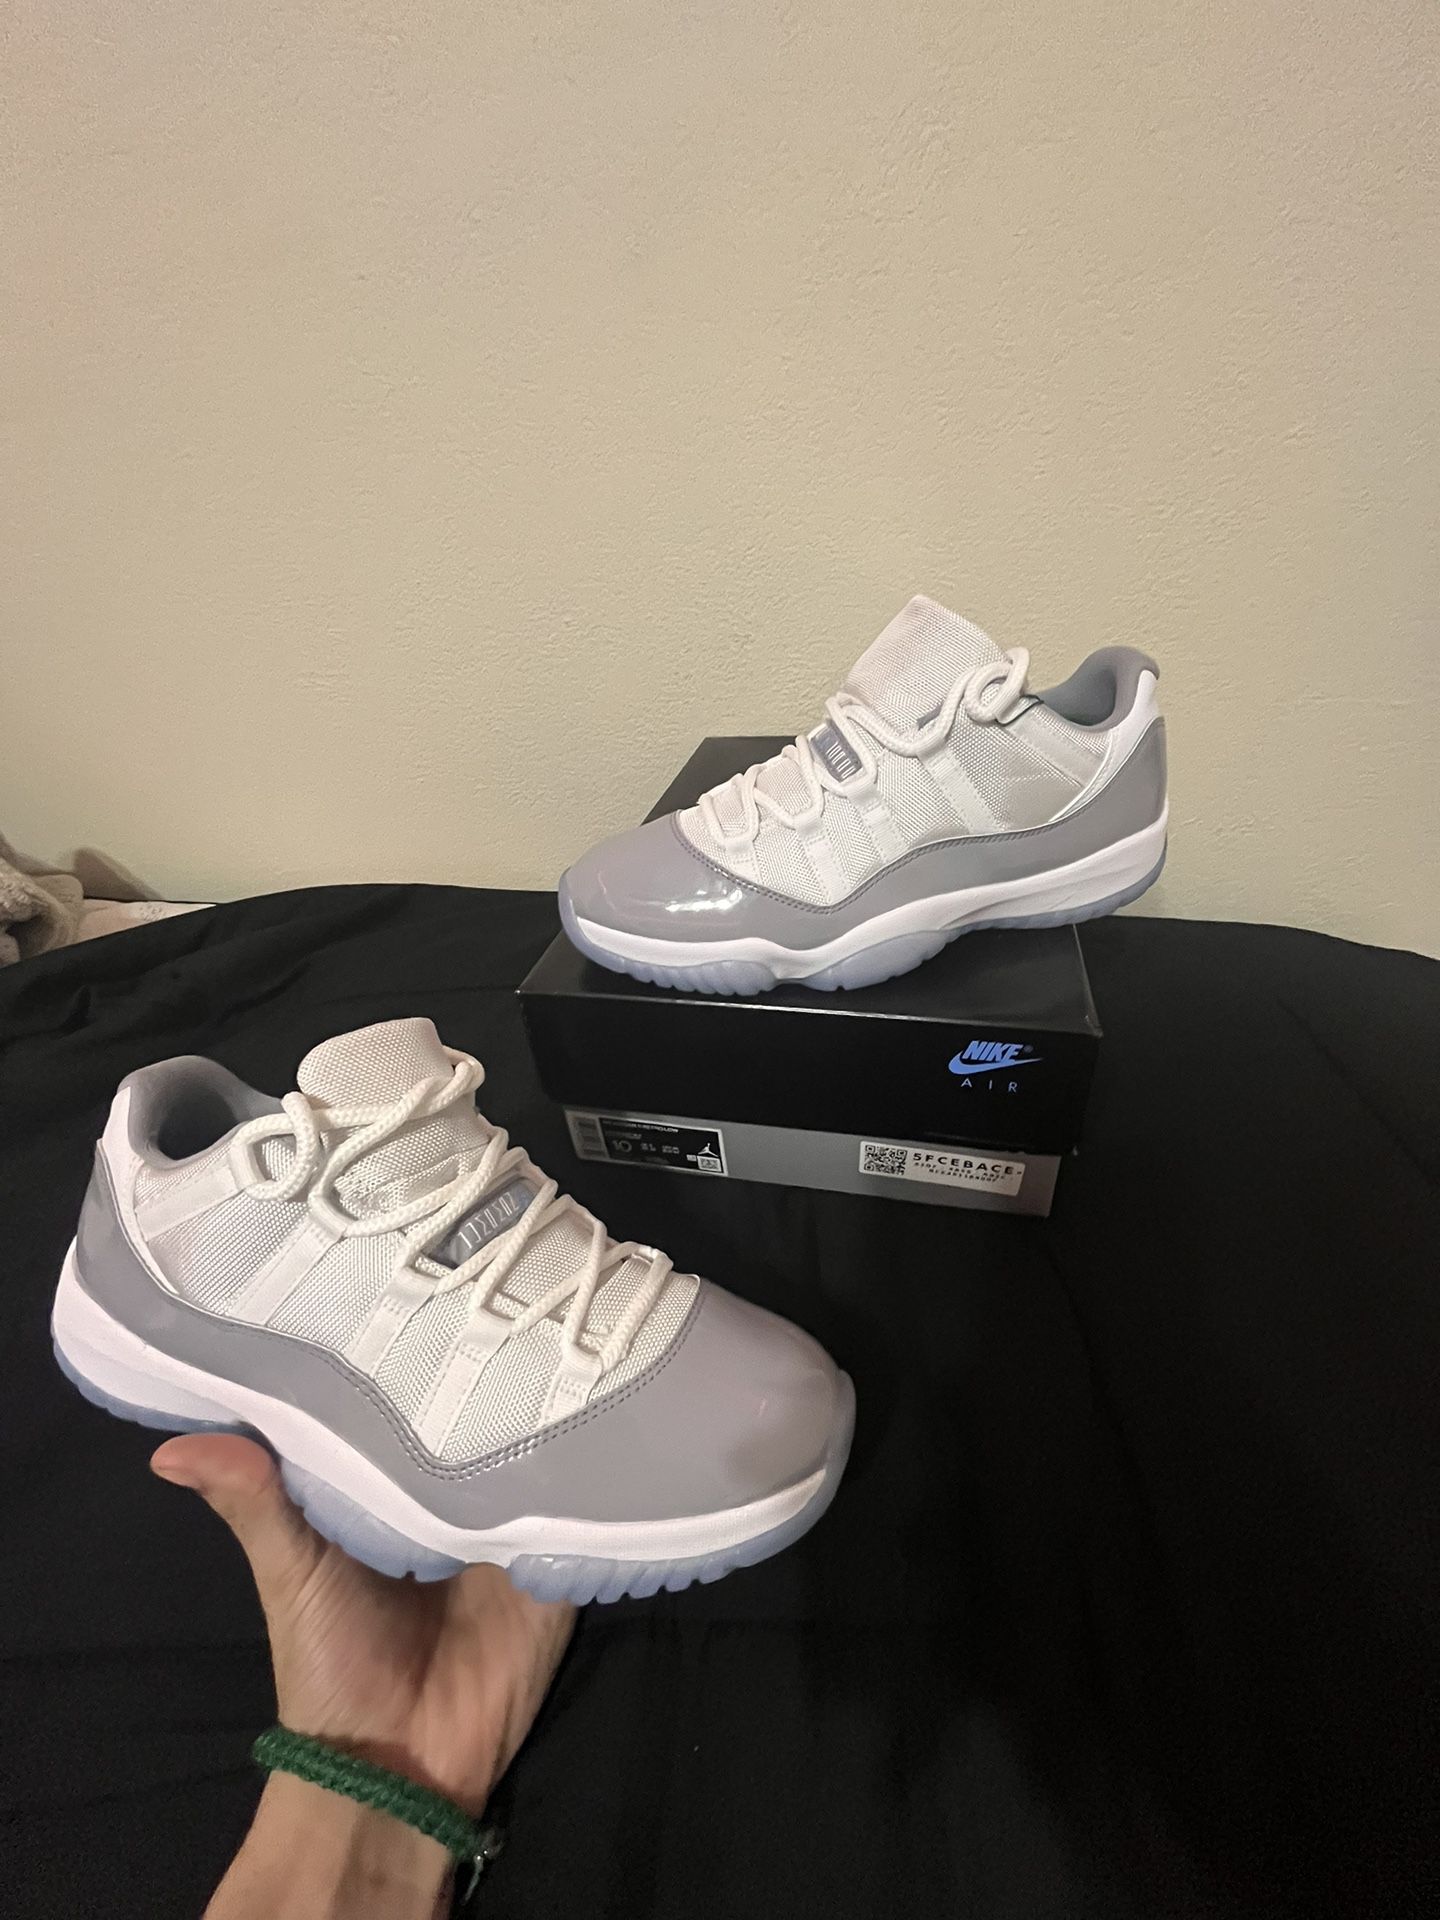 cool grey 11 lows size 10